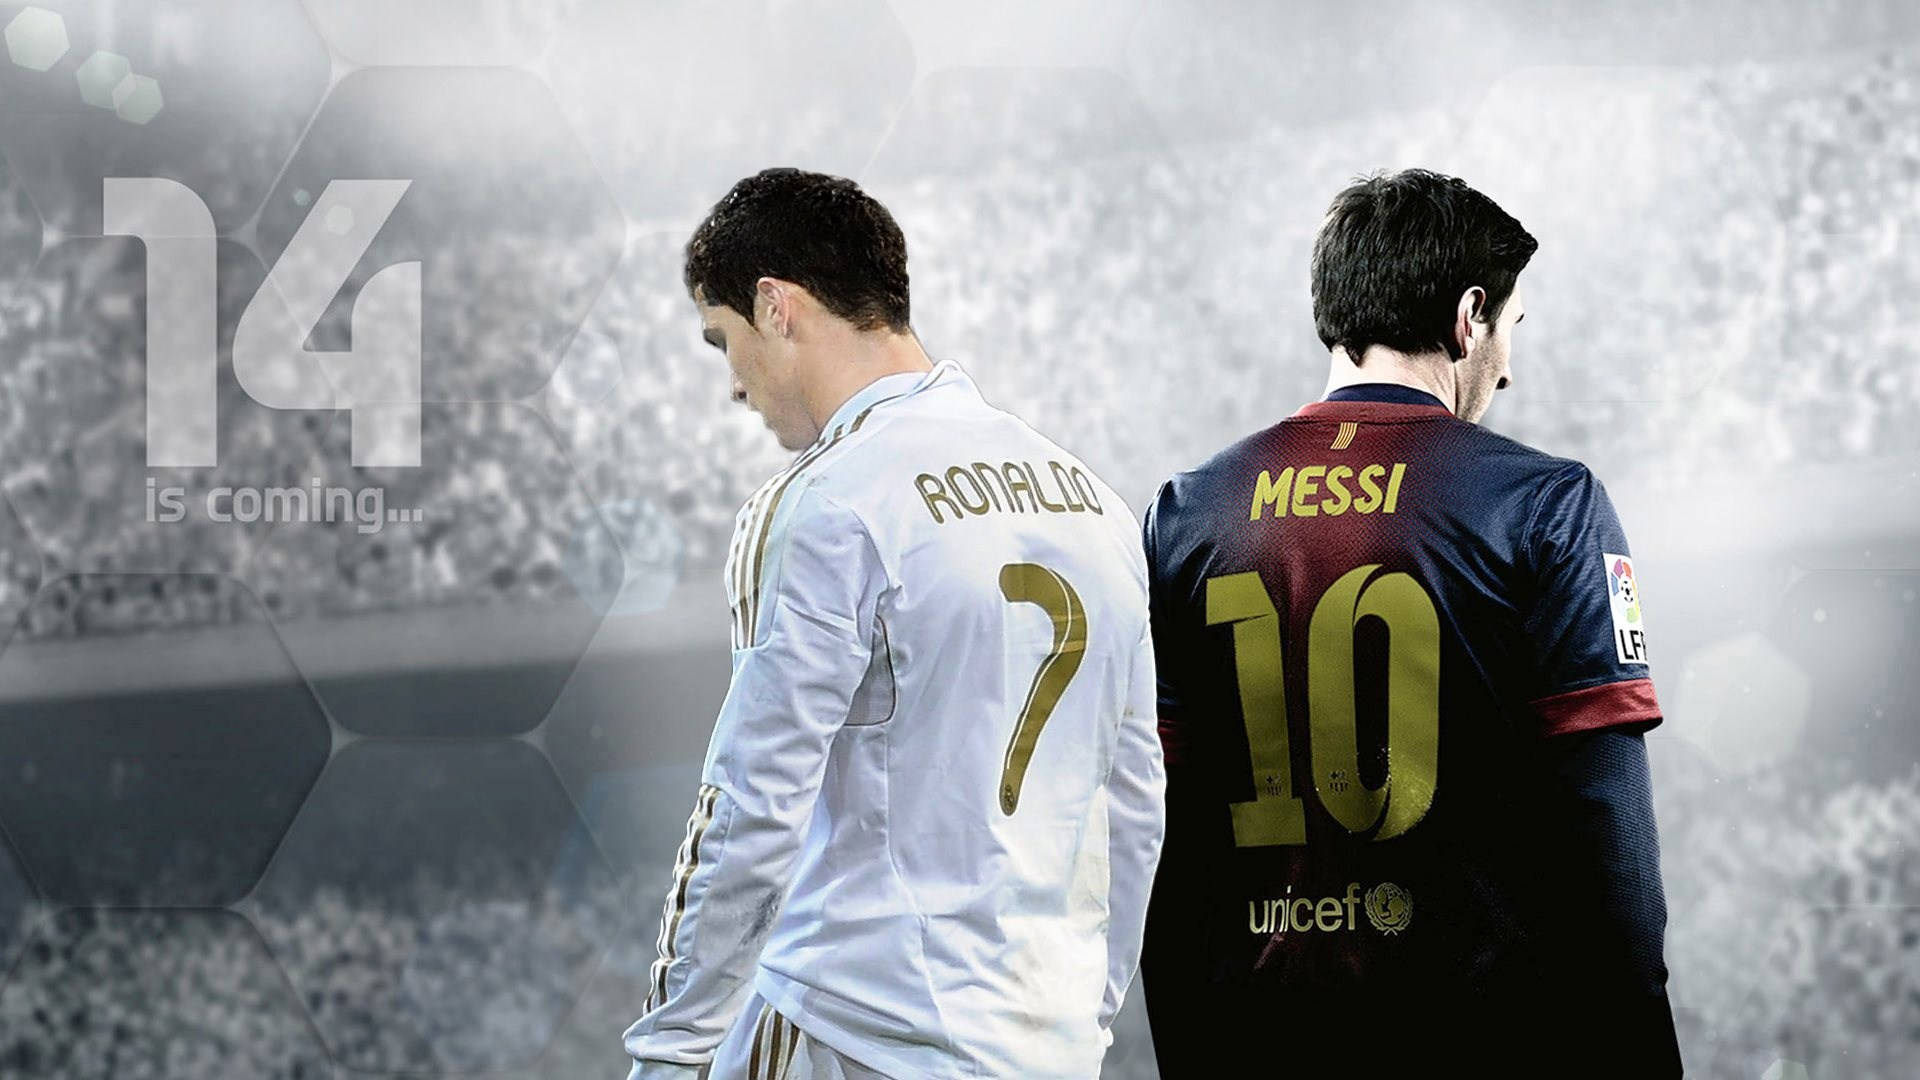 Download Two of the greatest soccer players of all time: Messi and Ronaldo  Wallpaper